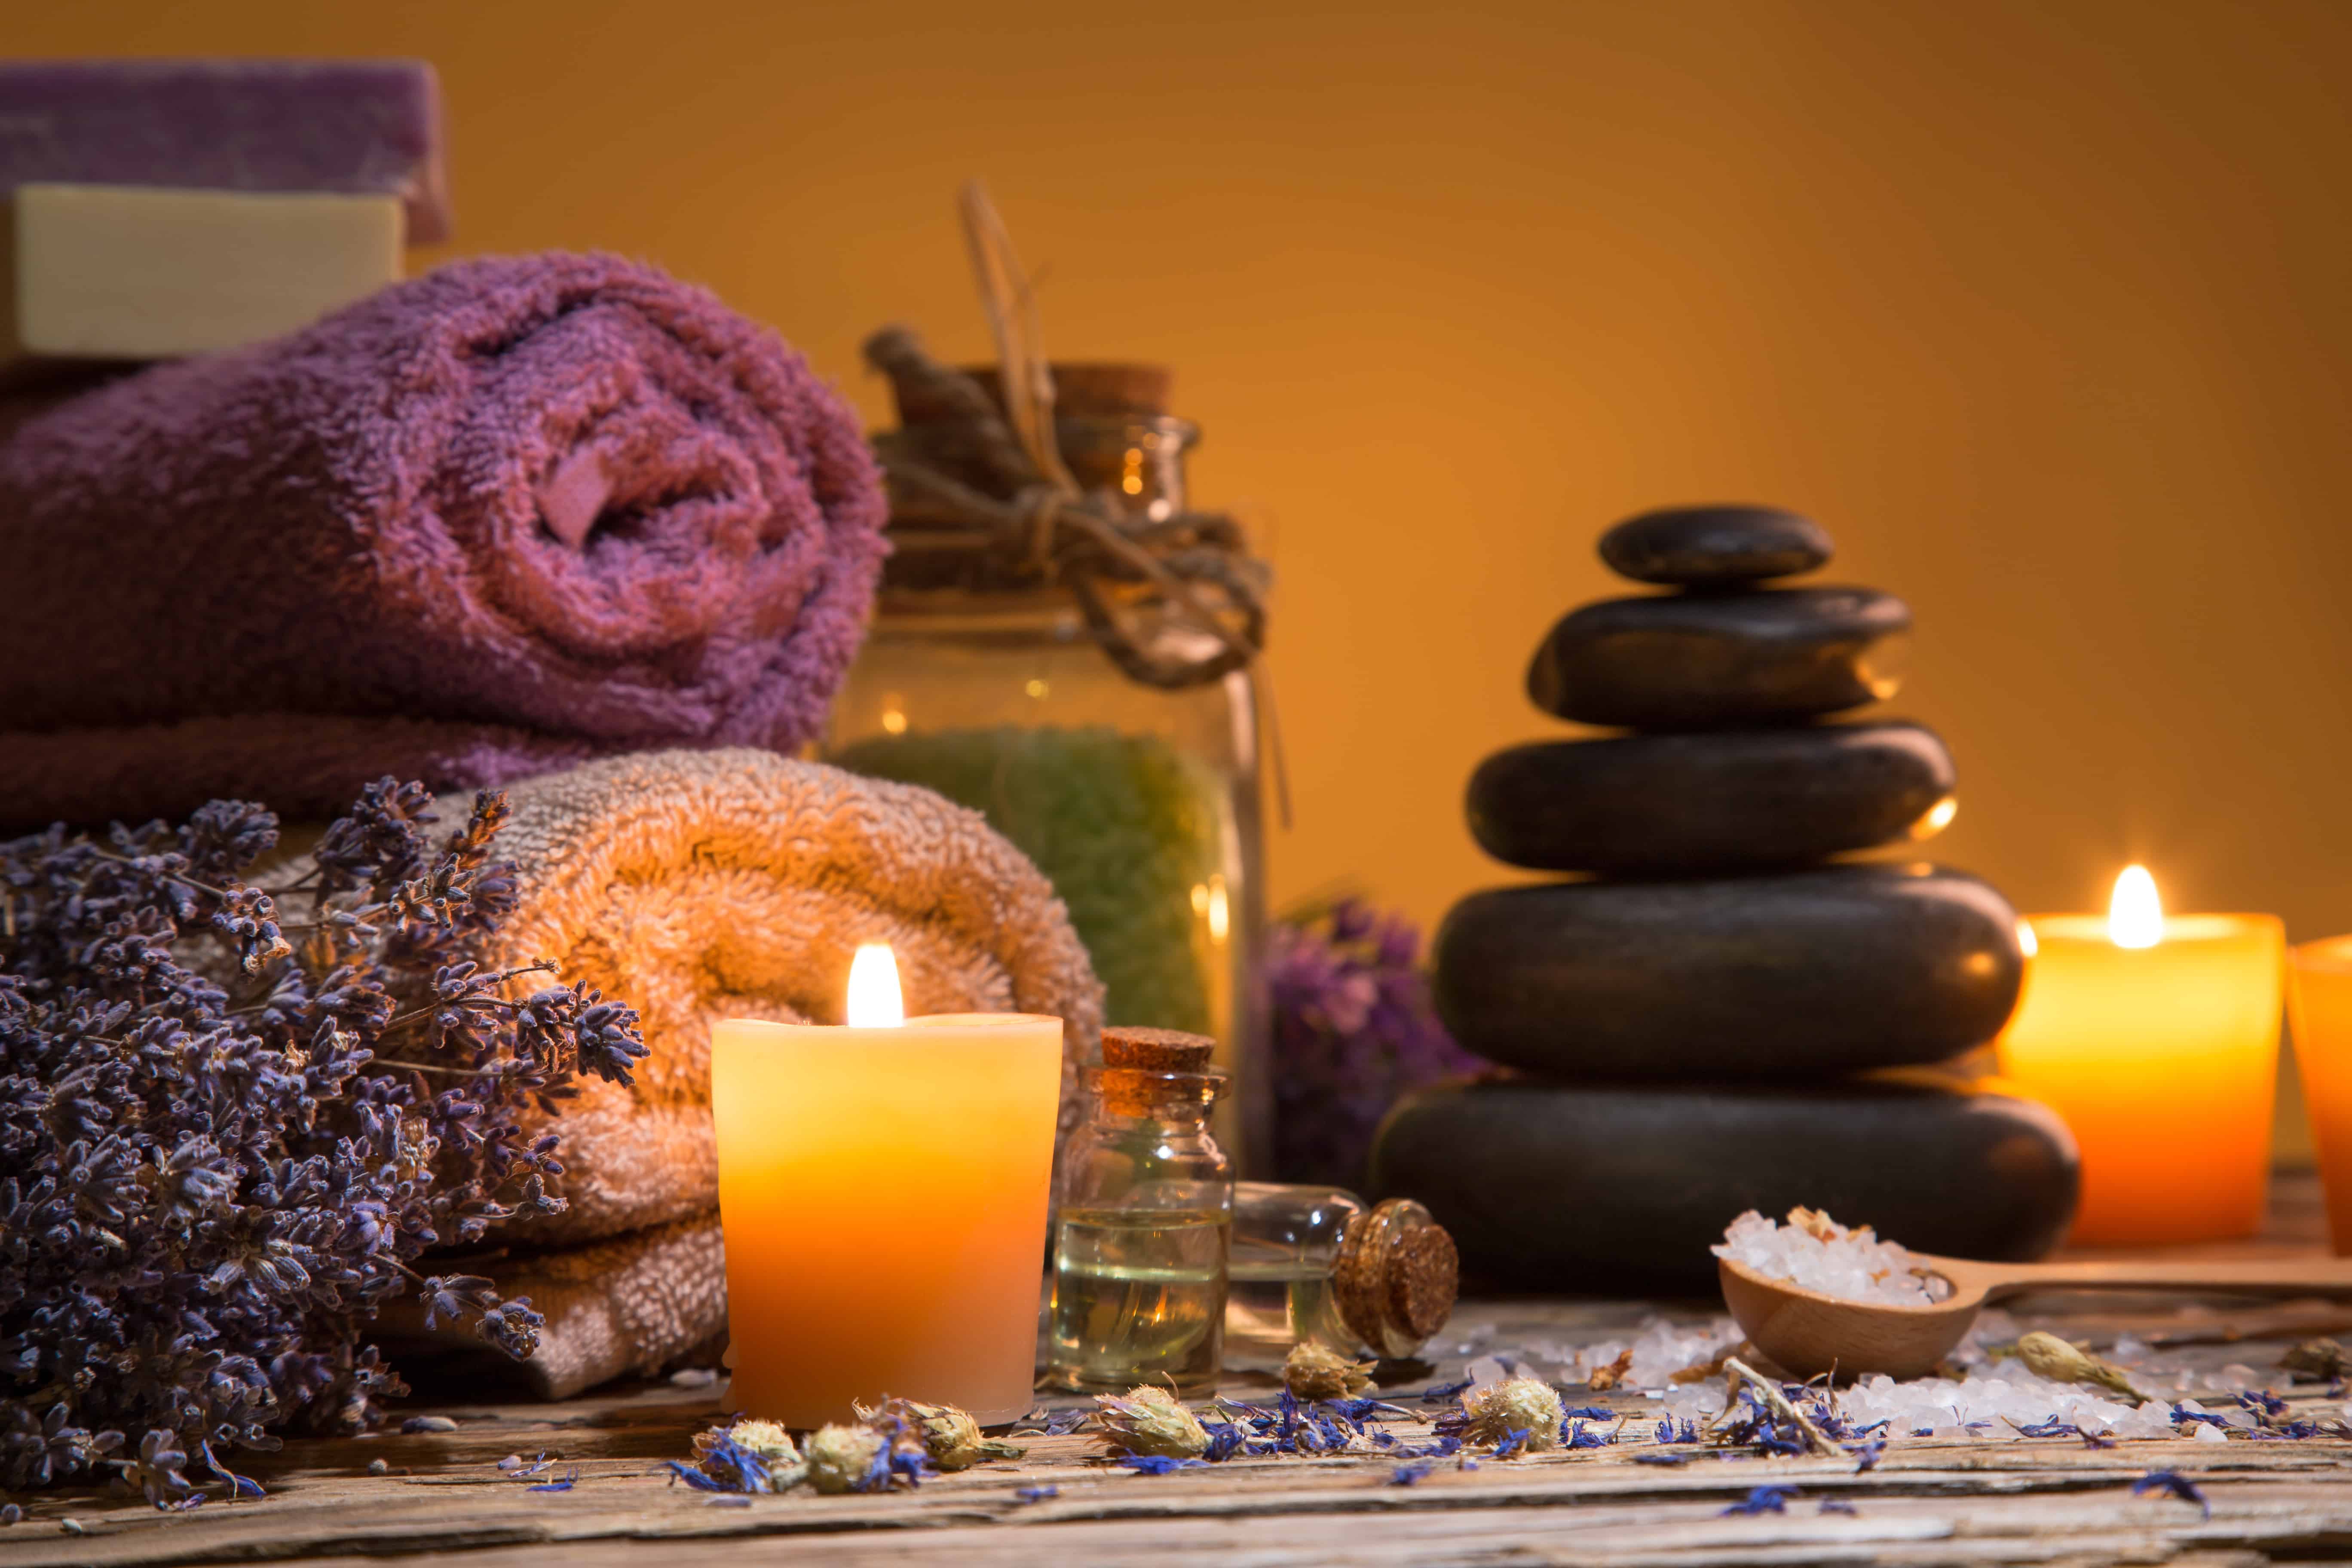 Image of spa items like a candle, salt, oil, lavendar, towels, stones, soap, and jars on a table. 